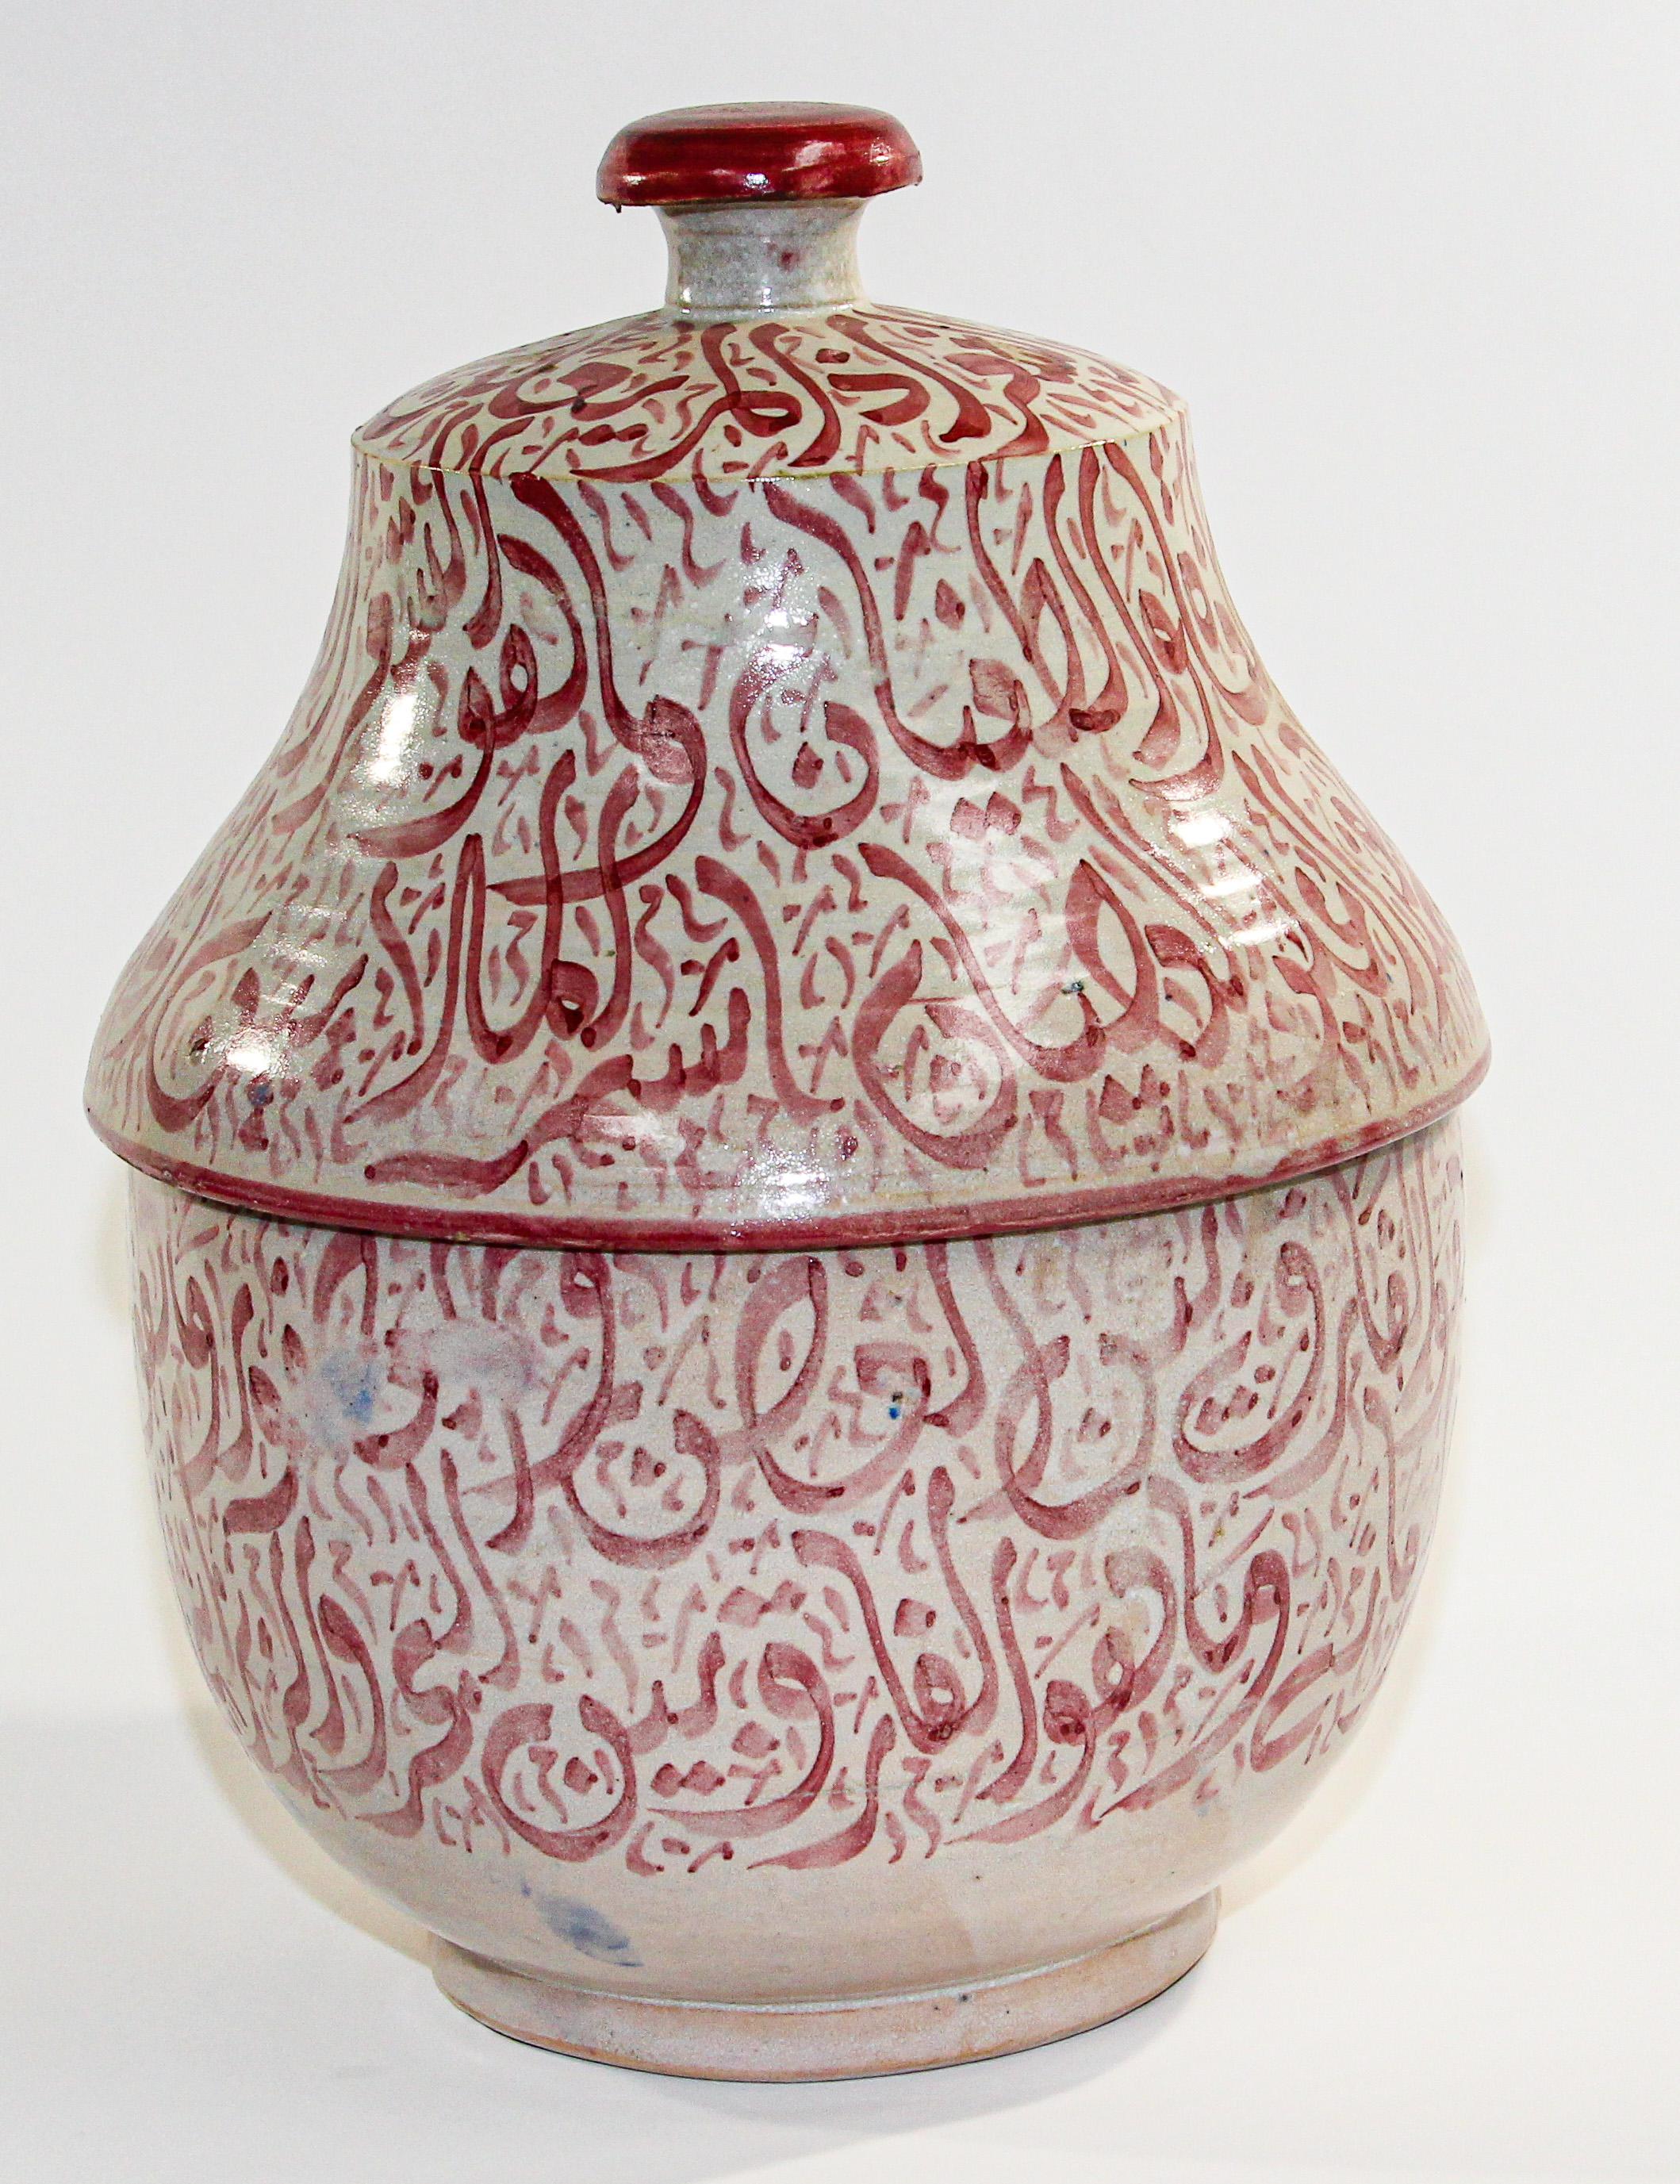 Moroccan Ceramic Lidded Urn from Fez with Arabic Calligraphy Pink Writing For Sale 10